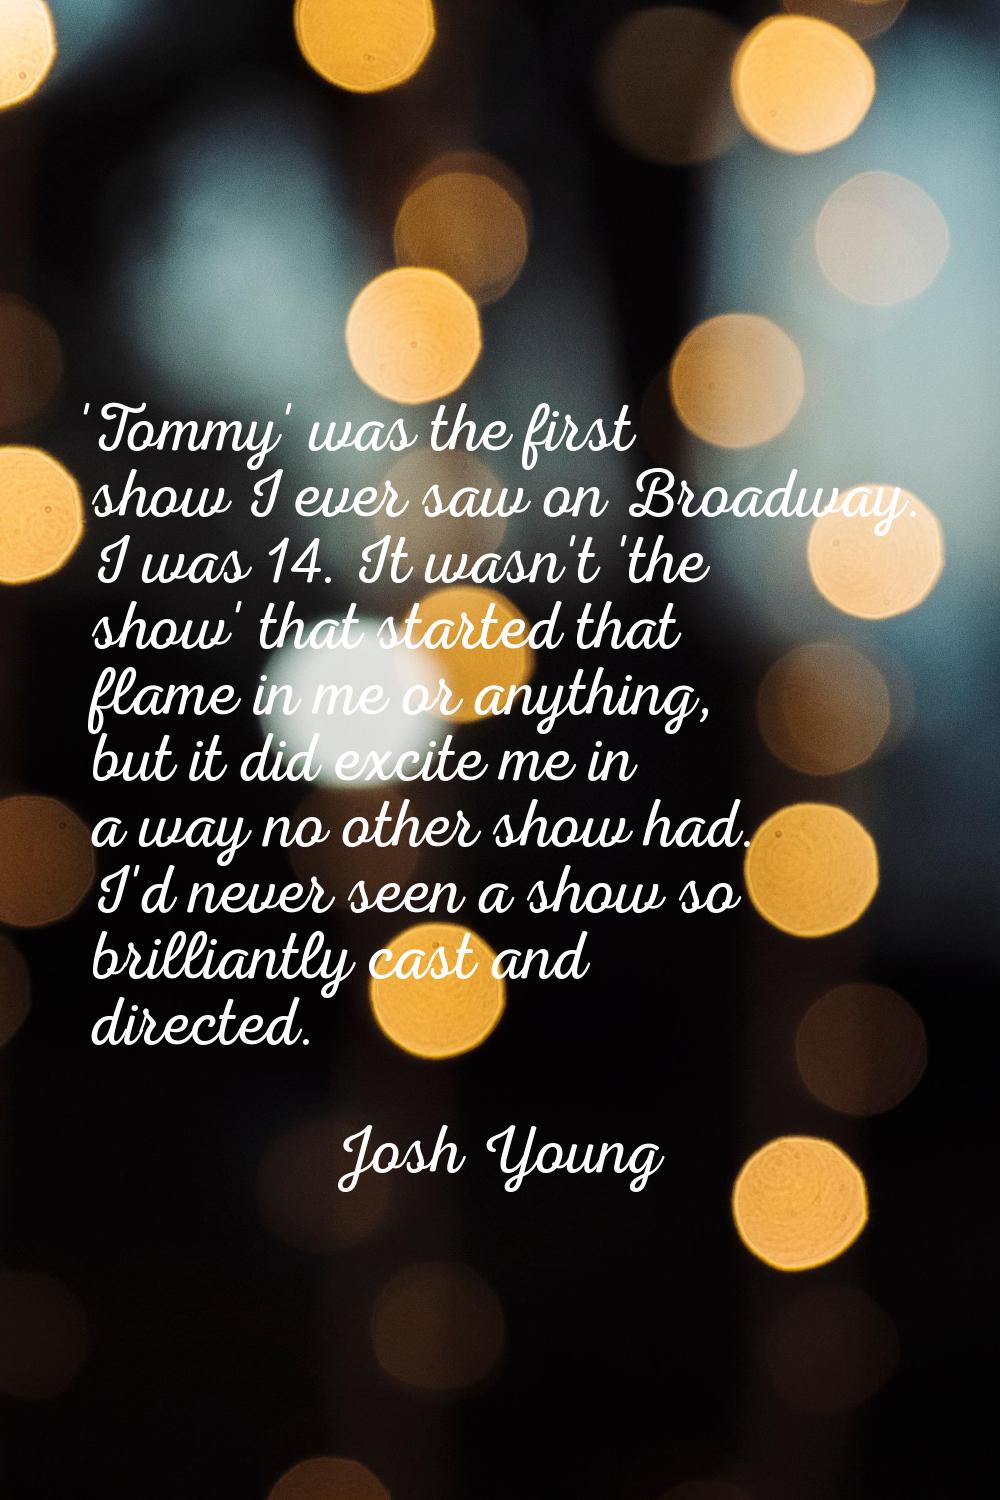 'Tommy' was the first show I ever saw on Broadway. I was 14. It wasn't 'the show' that started that